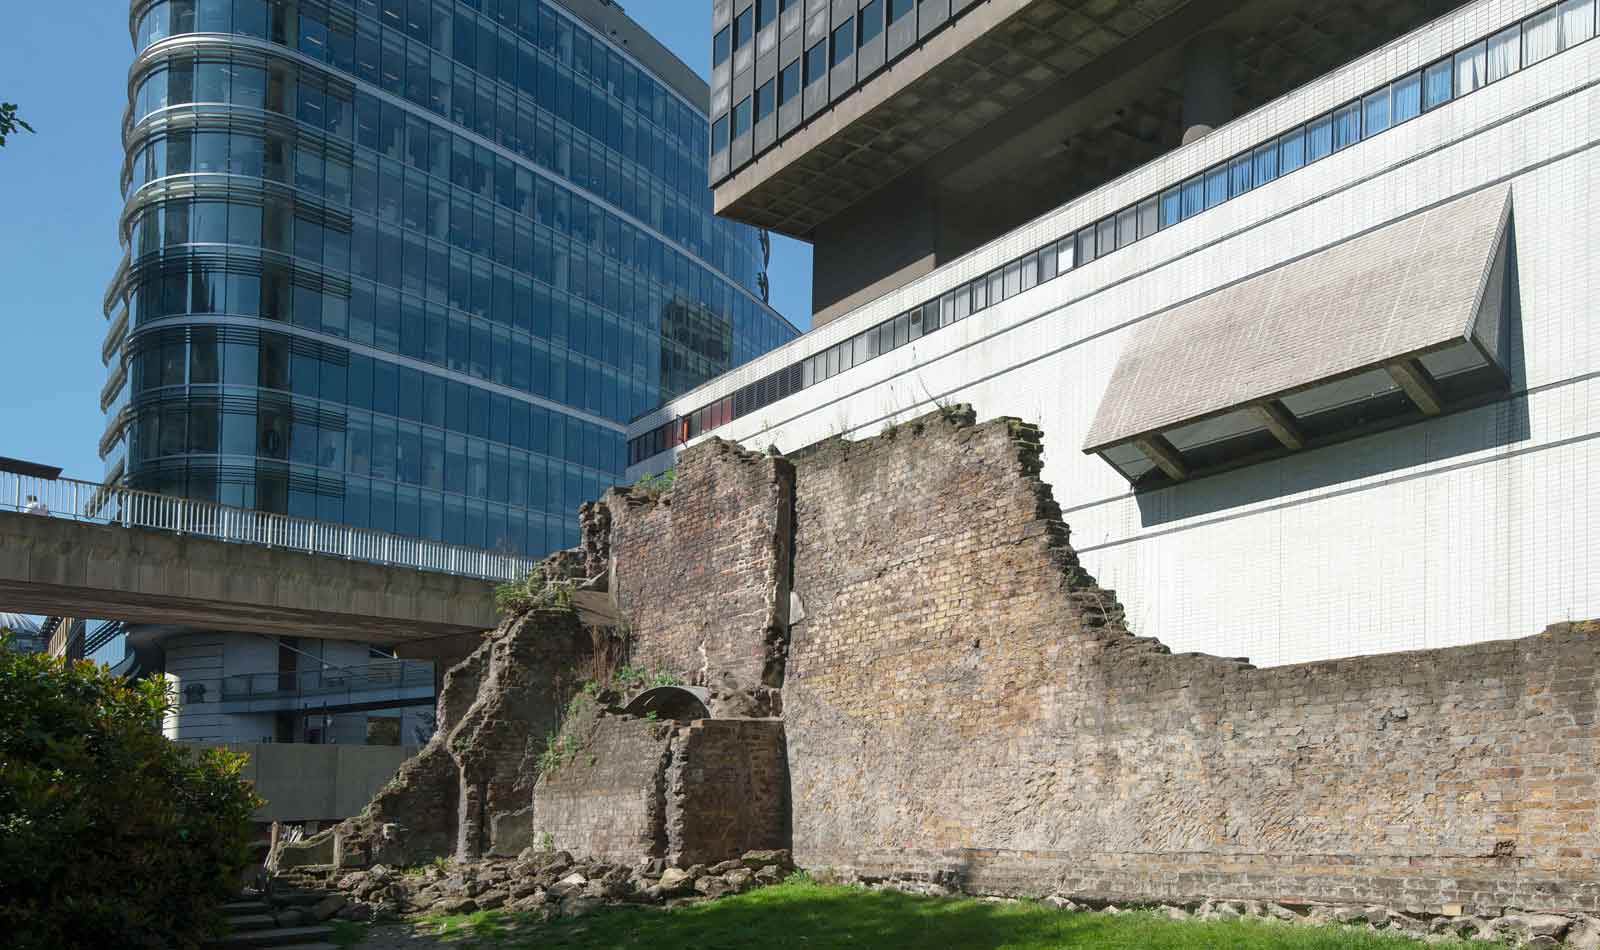 View from outside Roman London looking into what was once the fort and later part of the city wall.